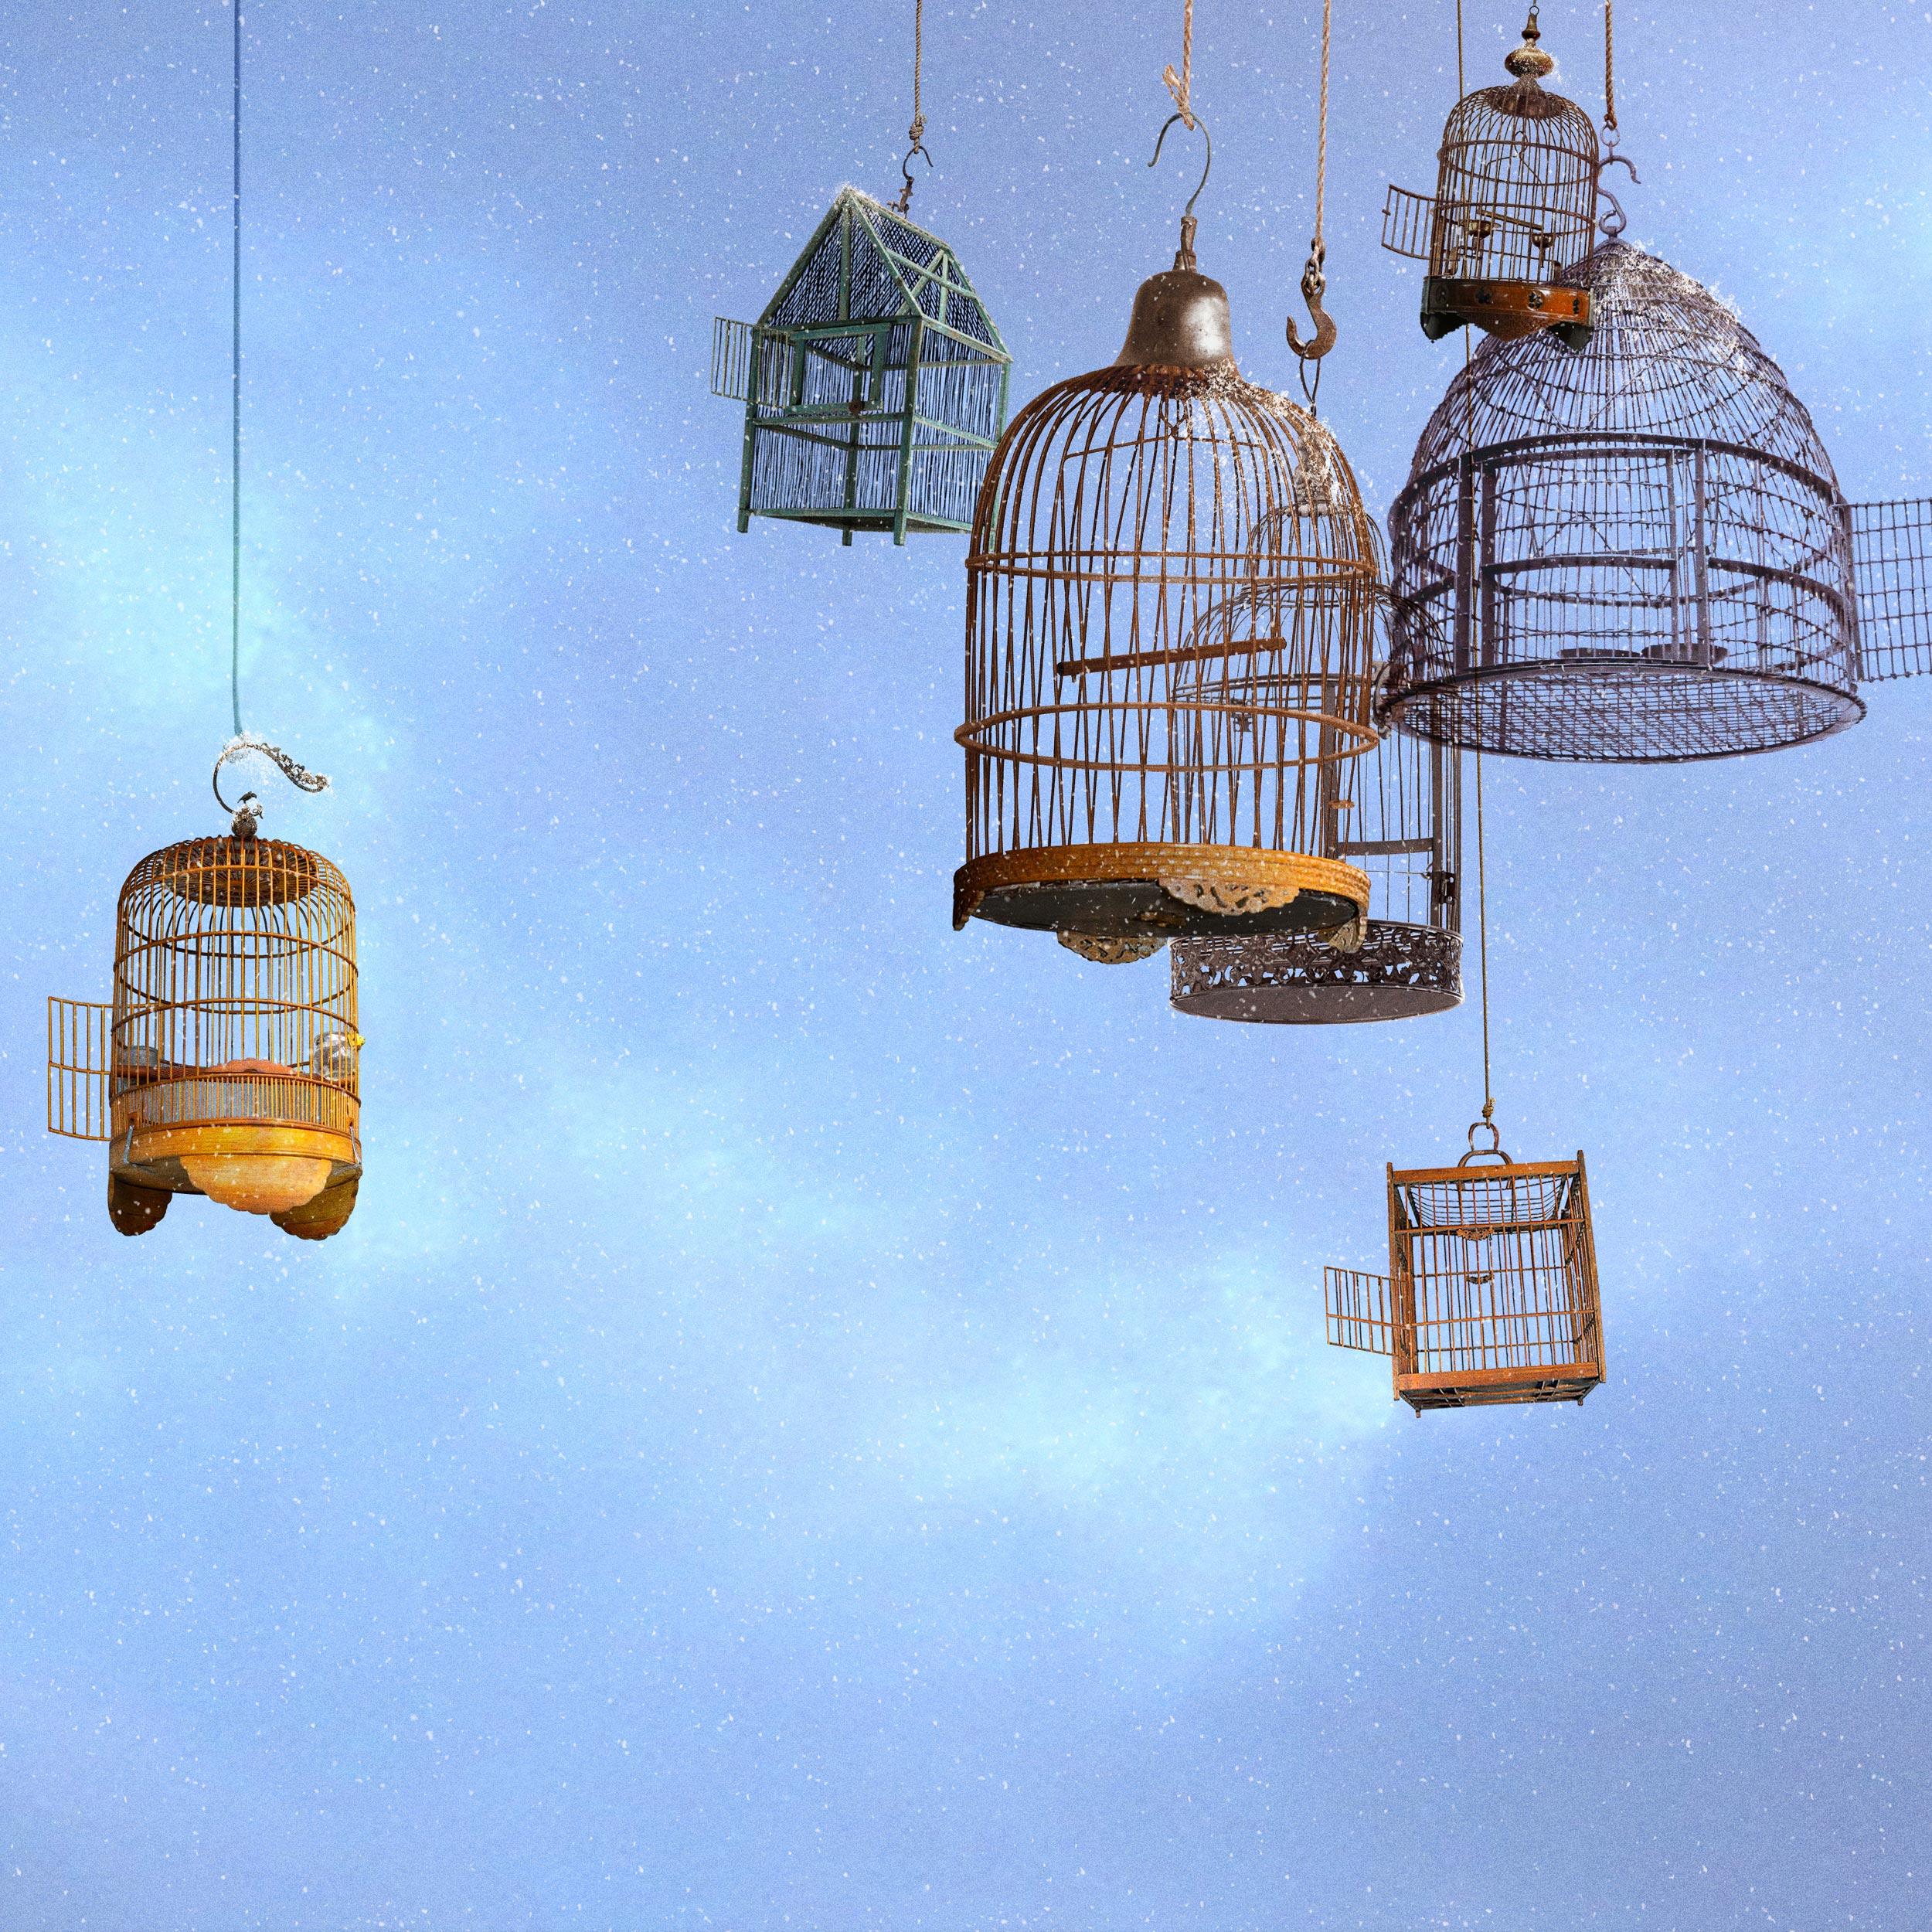 Bird charmer - Contemporary whimsical digital photo montage of a flying house  - Blue Color Photograph by Laurent Chéhère